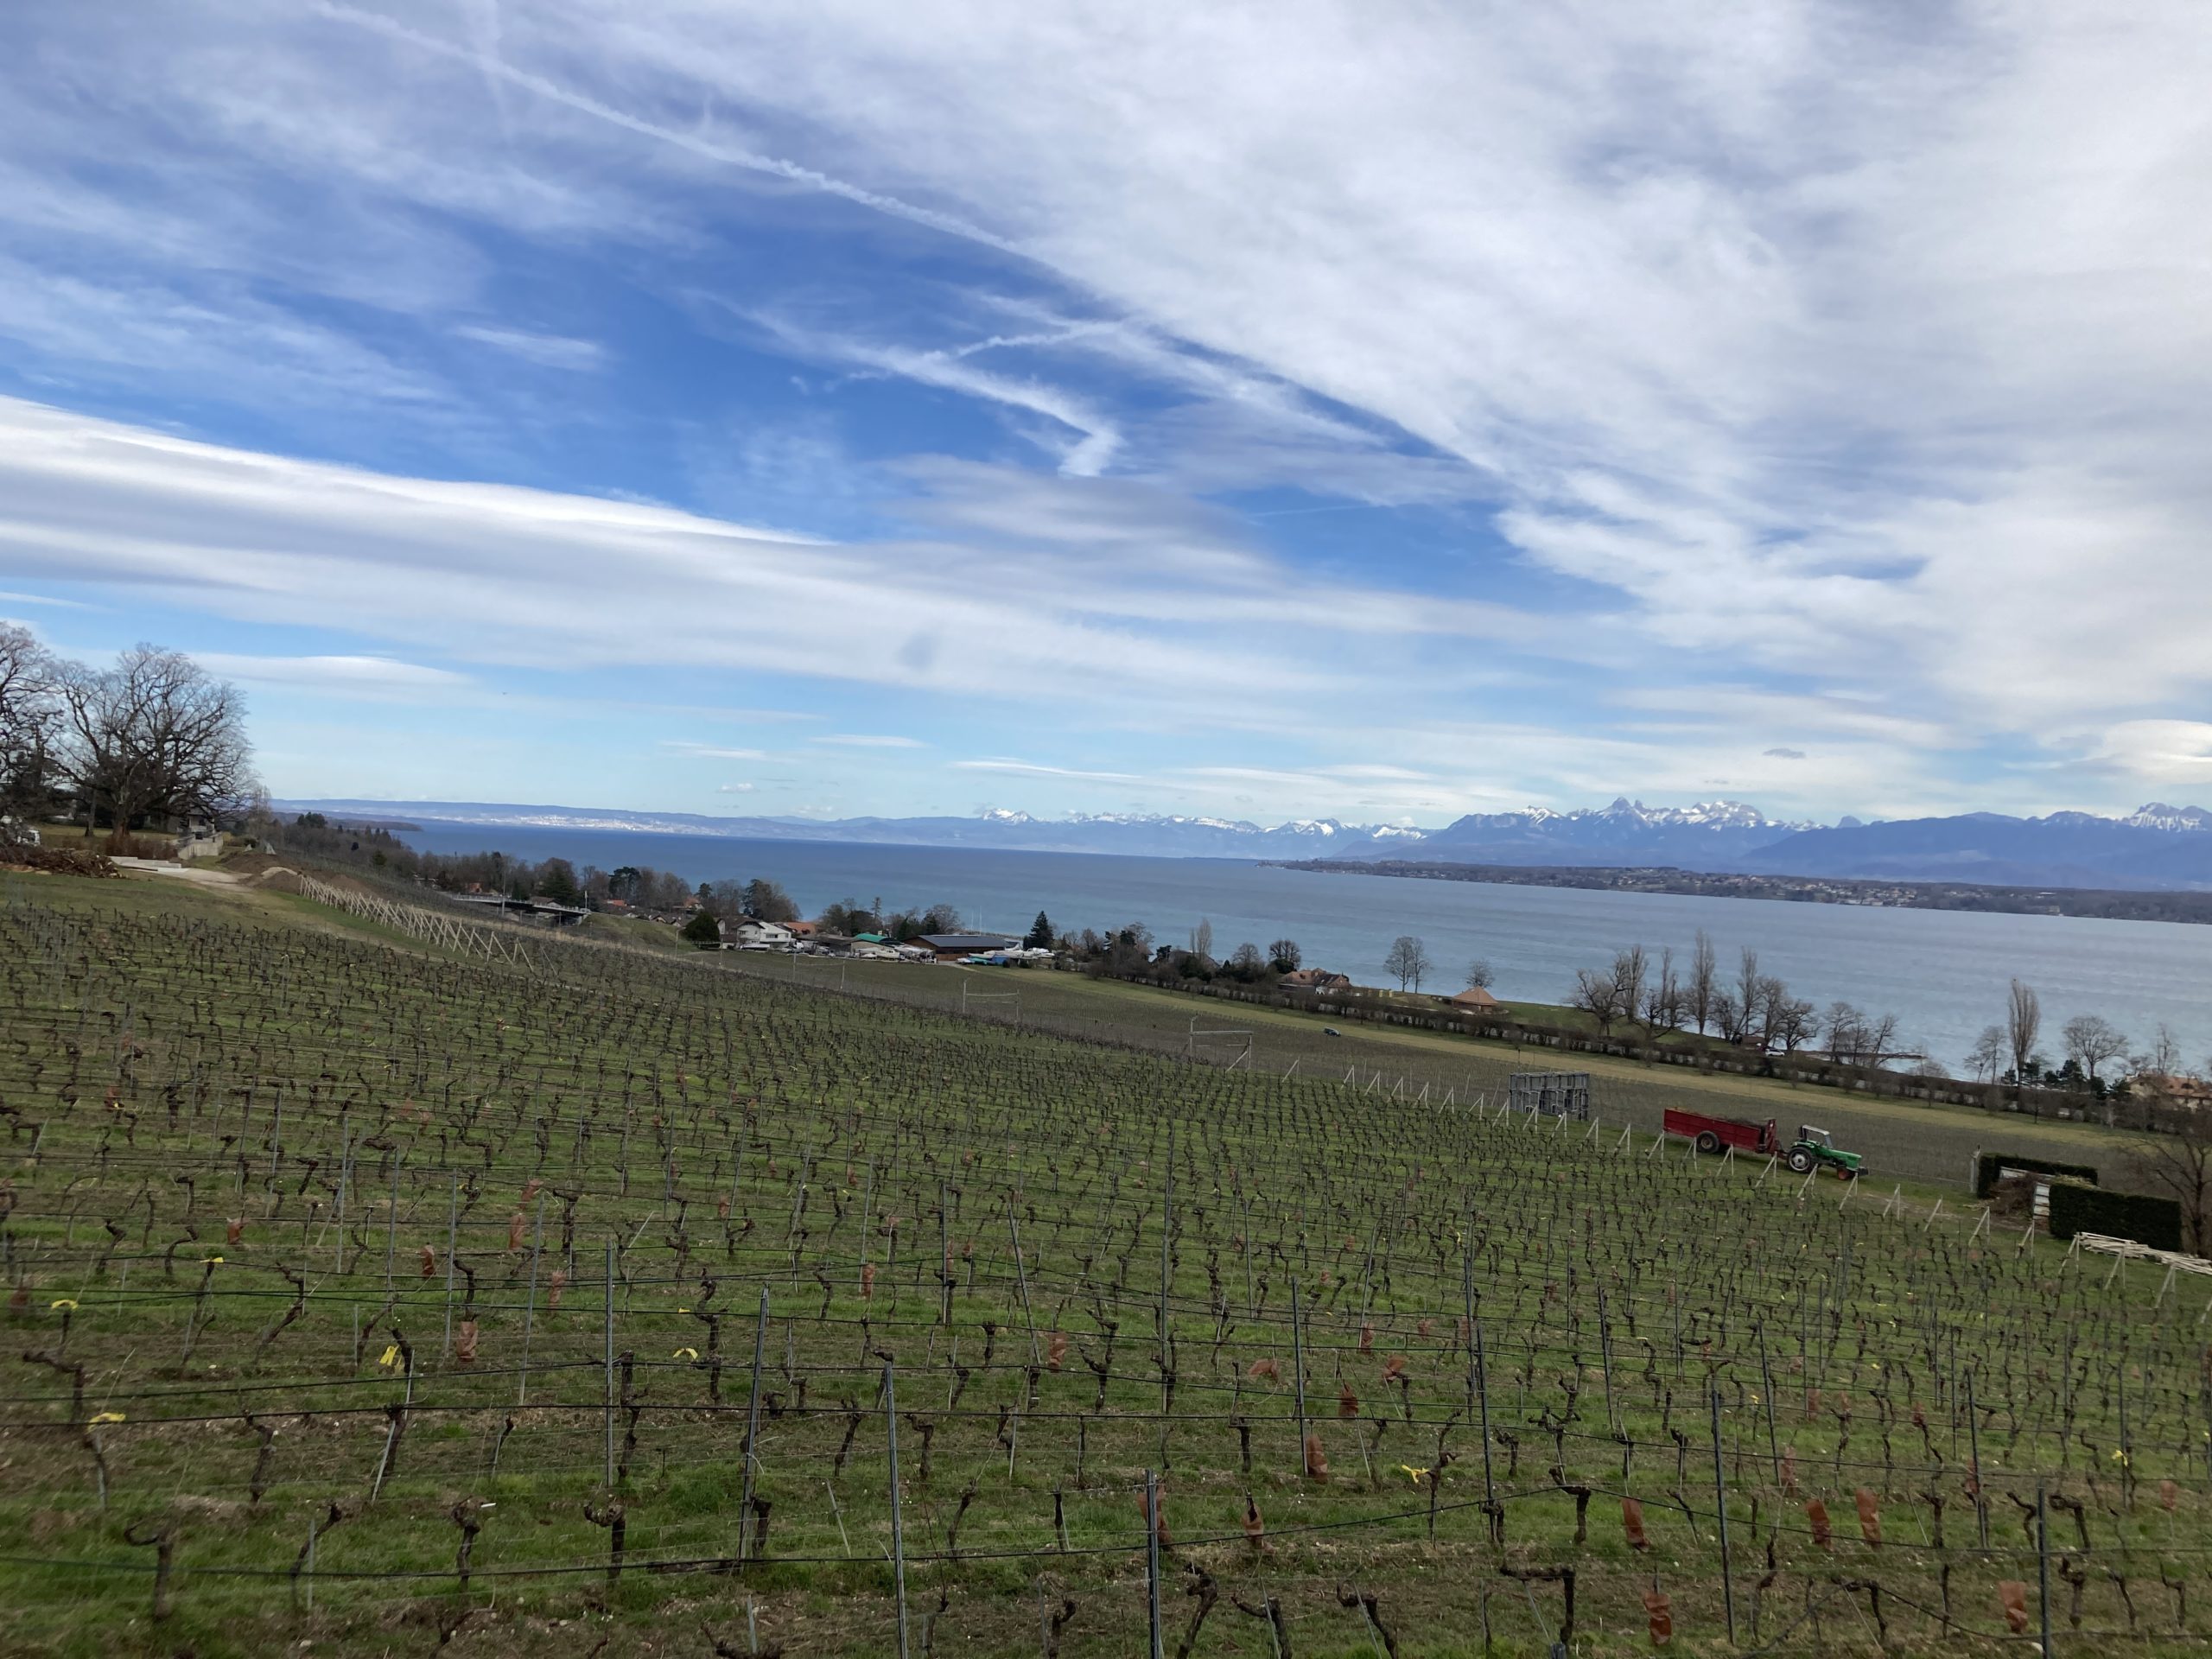 March Vineyards with the Léman and Alps